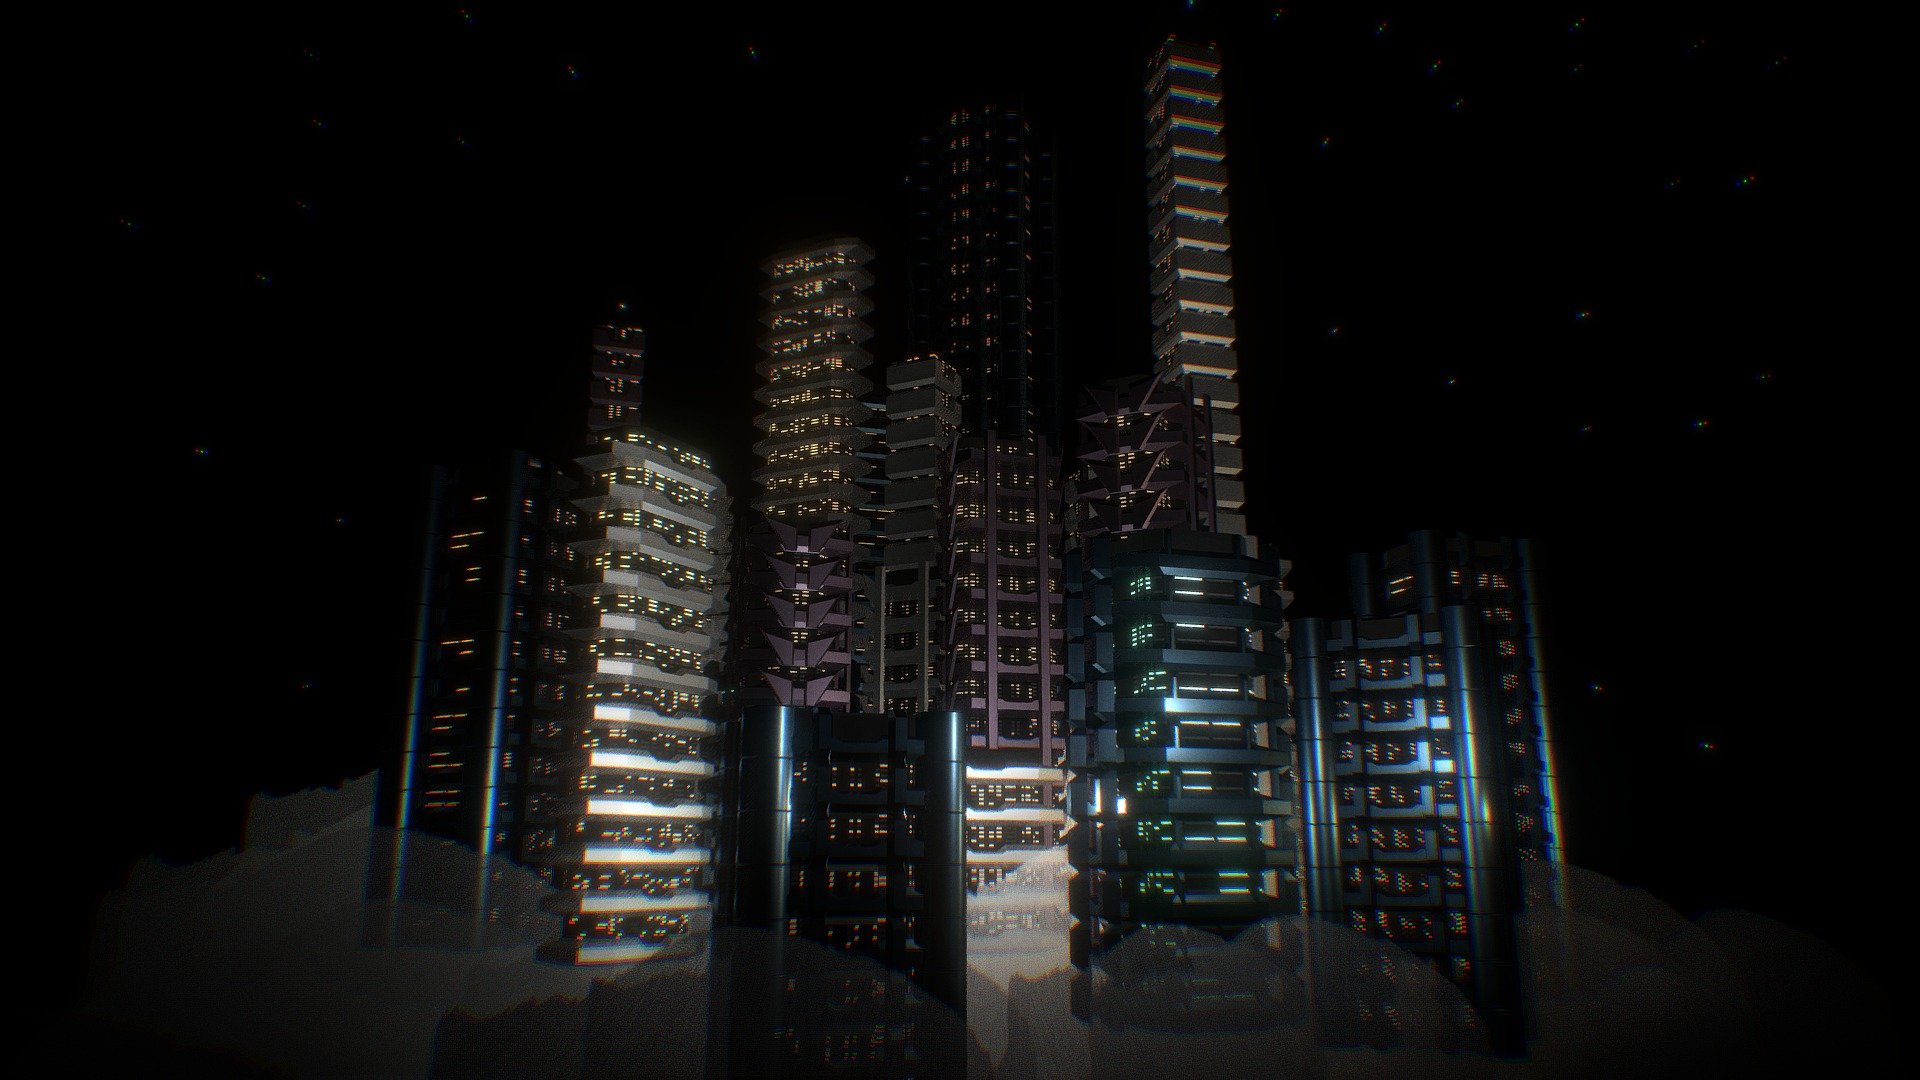 This is public domain (CC0), I'm as the author give it away to the World. This model and design can be used by anybody for anything. No attribution required.

making of video
https://youtu.be/kgsTW0aajBE - FREE Sci-Fi City - public domain (CC0) - Download Free 3D model by Unity Fan youtube channel (@unityfan777) 3d model